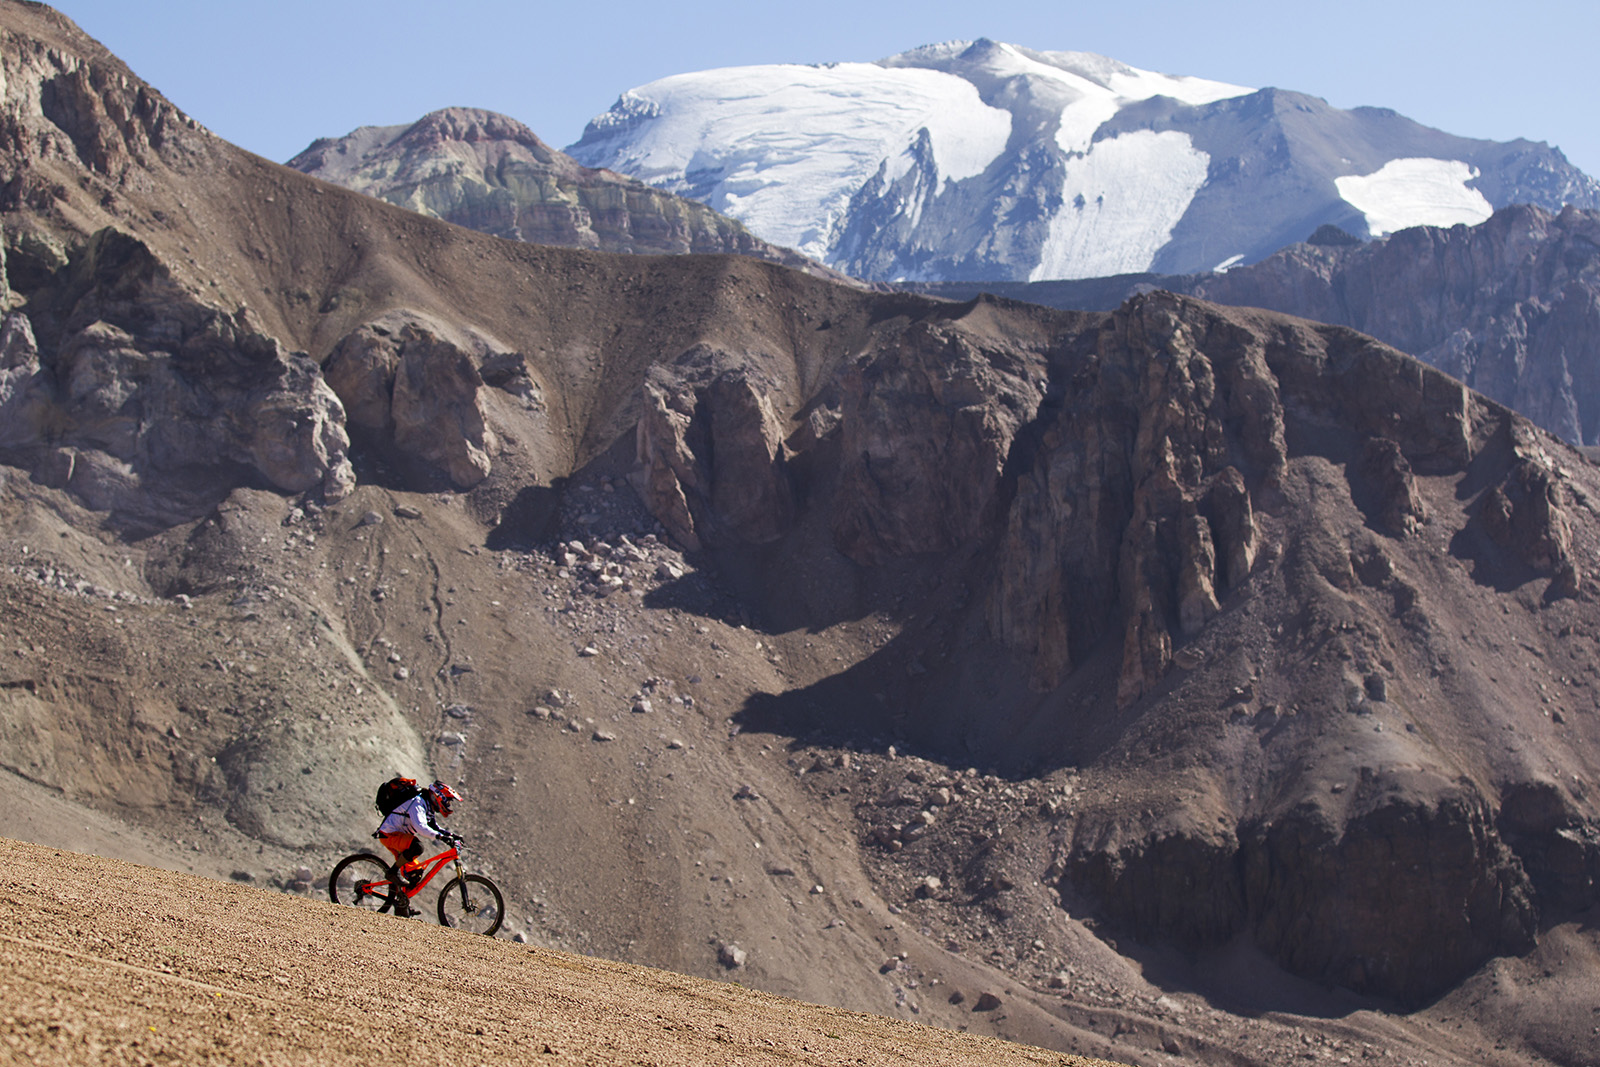 10 February 2015 - a competitor on stage 1 of Day 1 during the 2015 Andes Pacifico Enduro stage race in Santiago, Chile. Photo by Gary Perkin